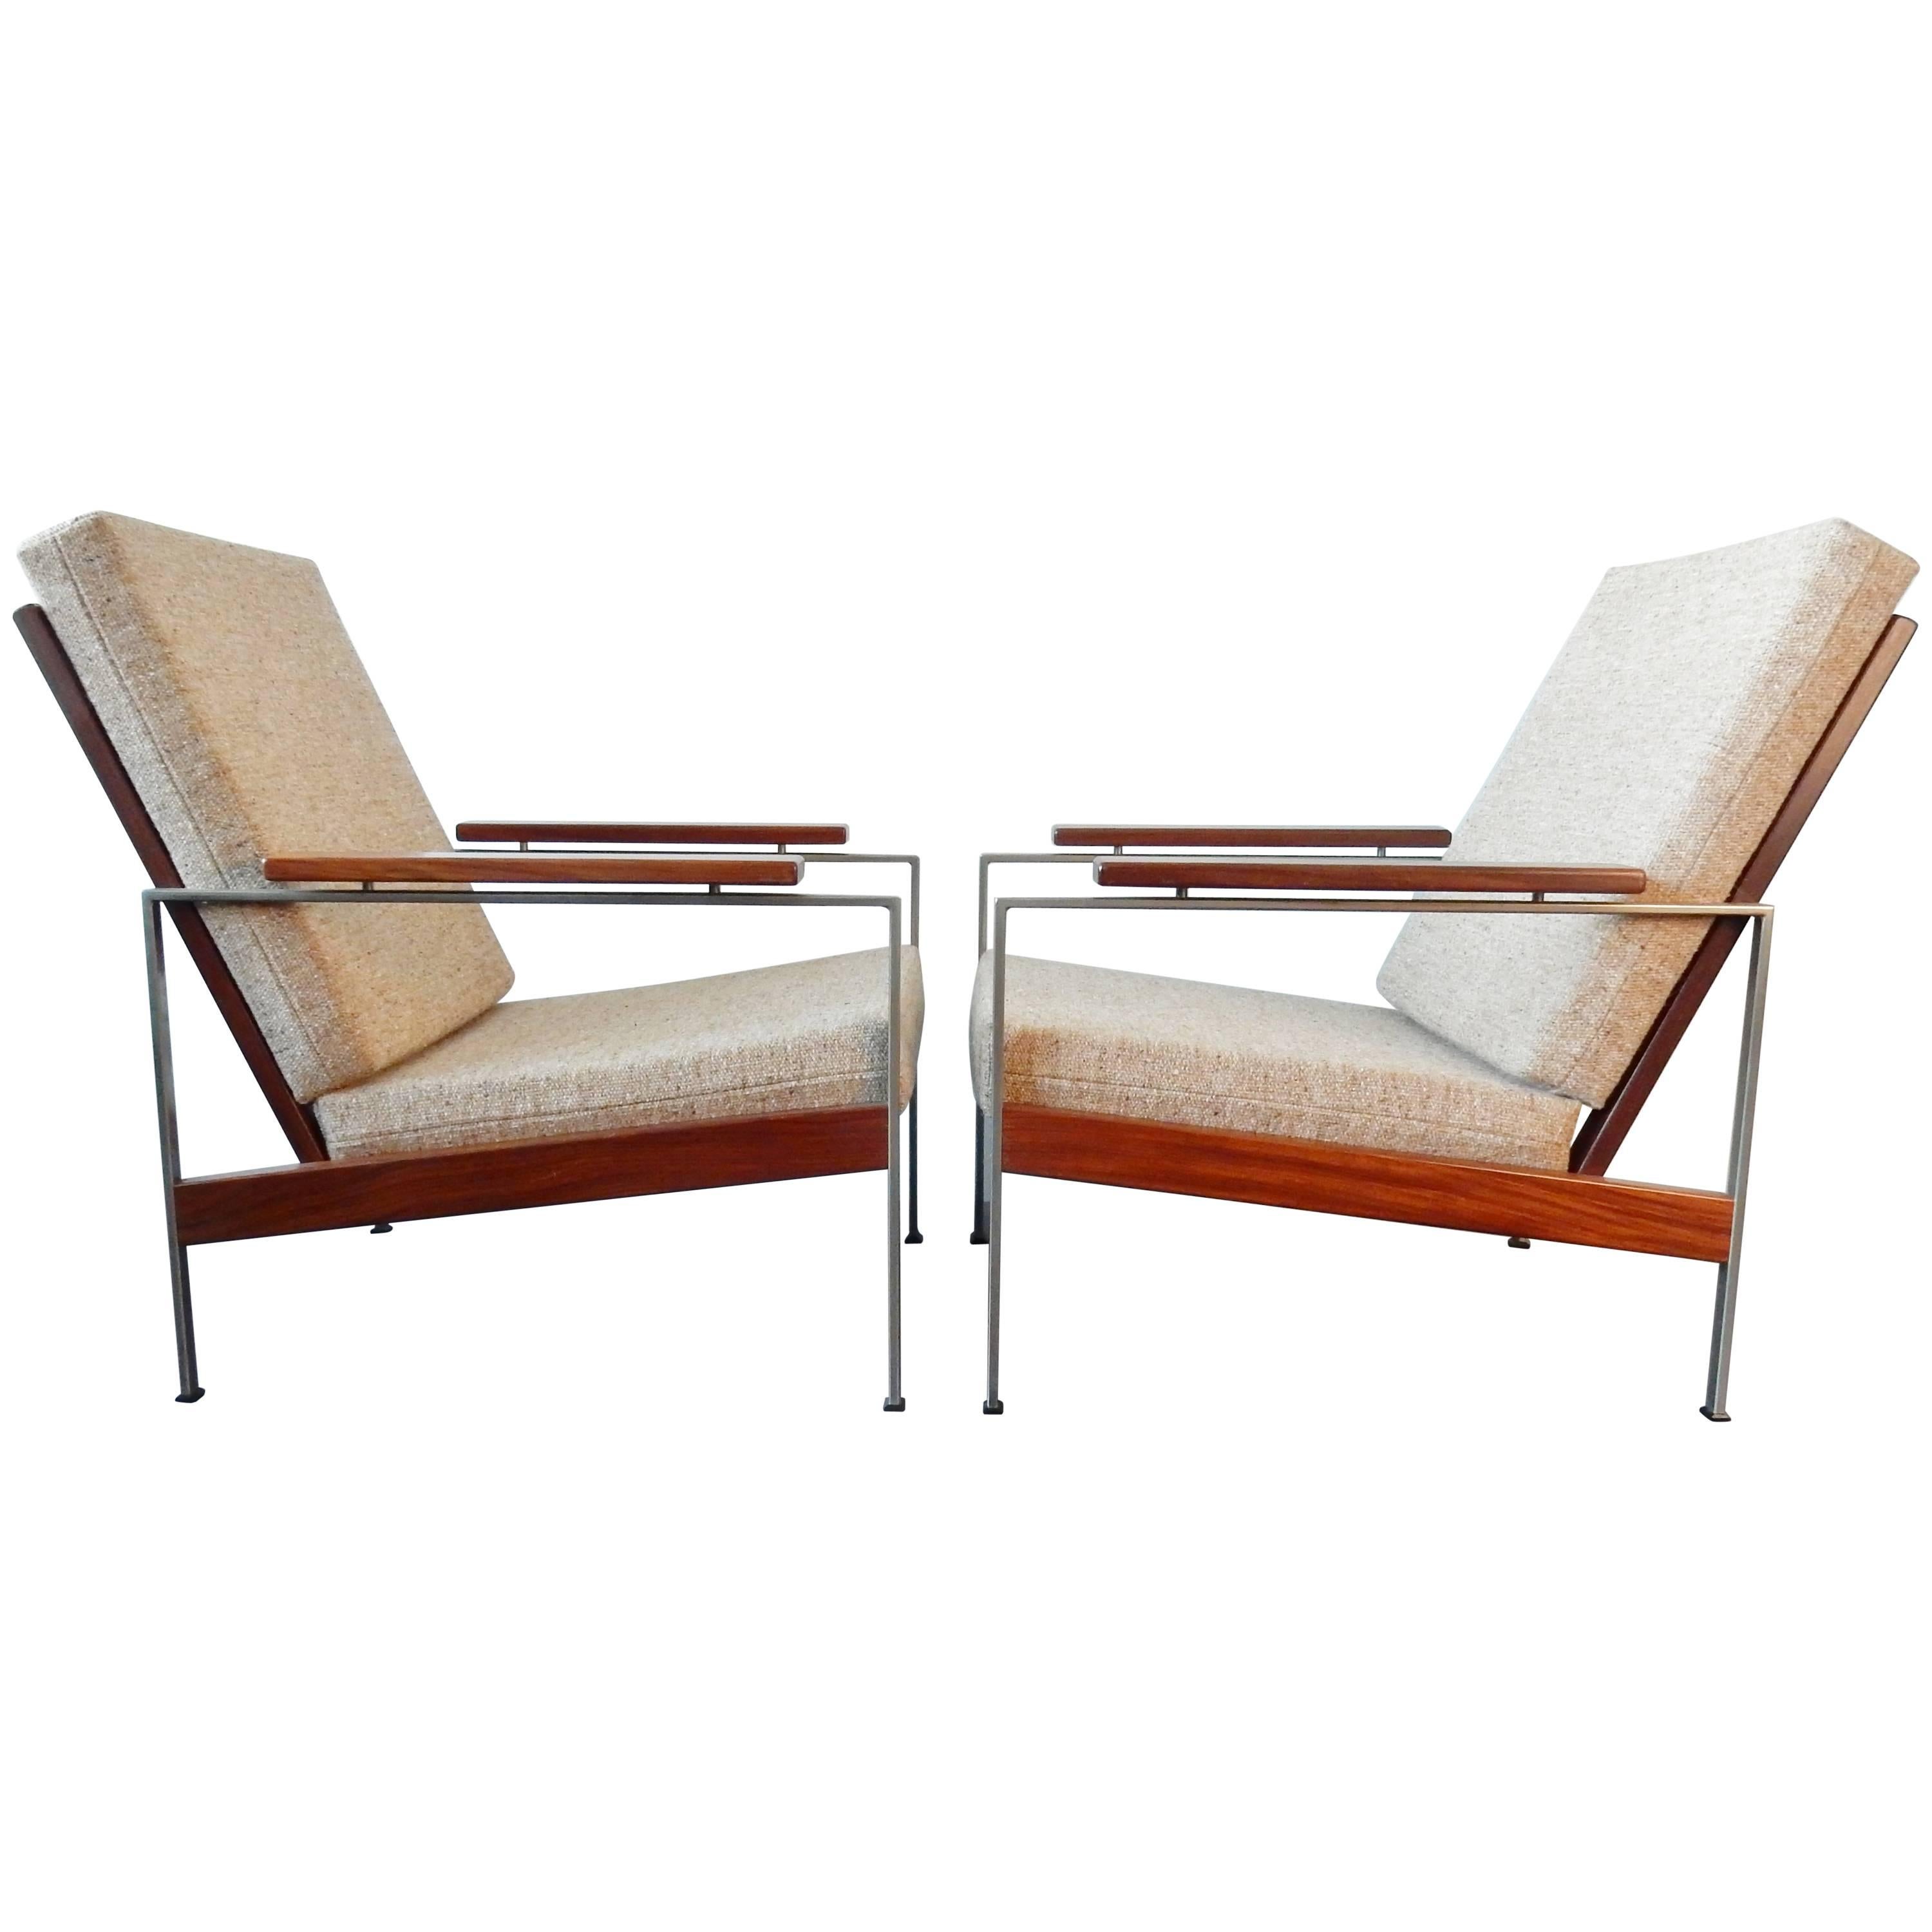 Set of Two Lounge Chairs by Rob Parry for Gelderland, Netherlands, 1960s